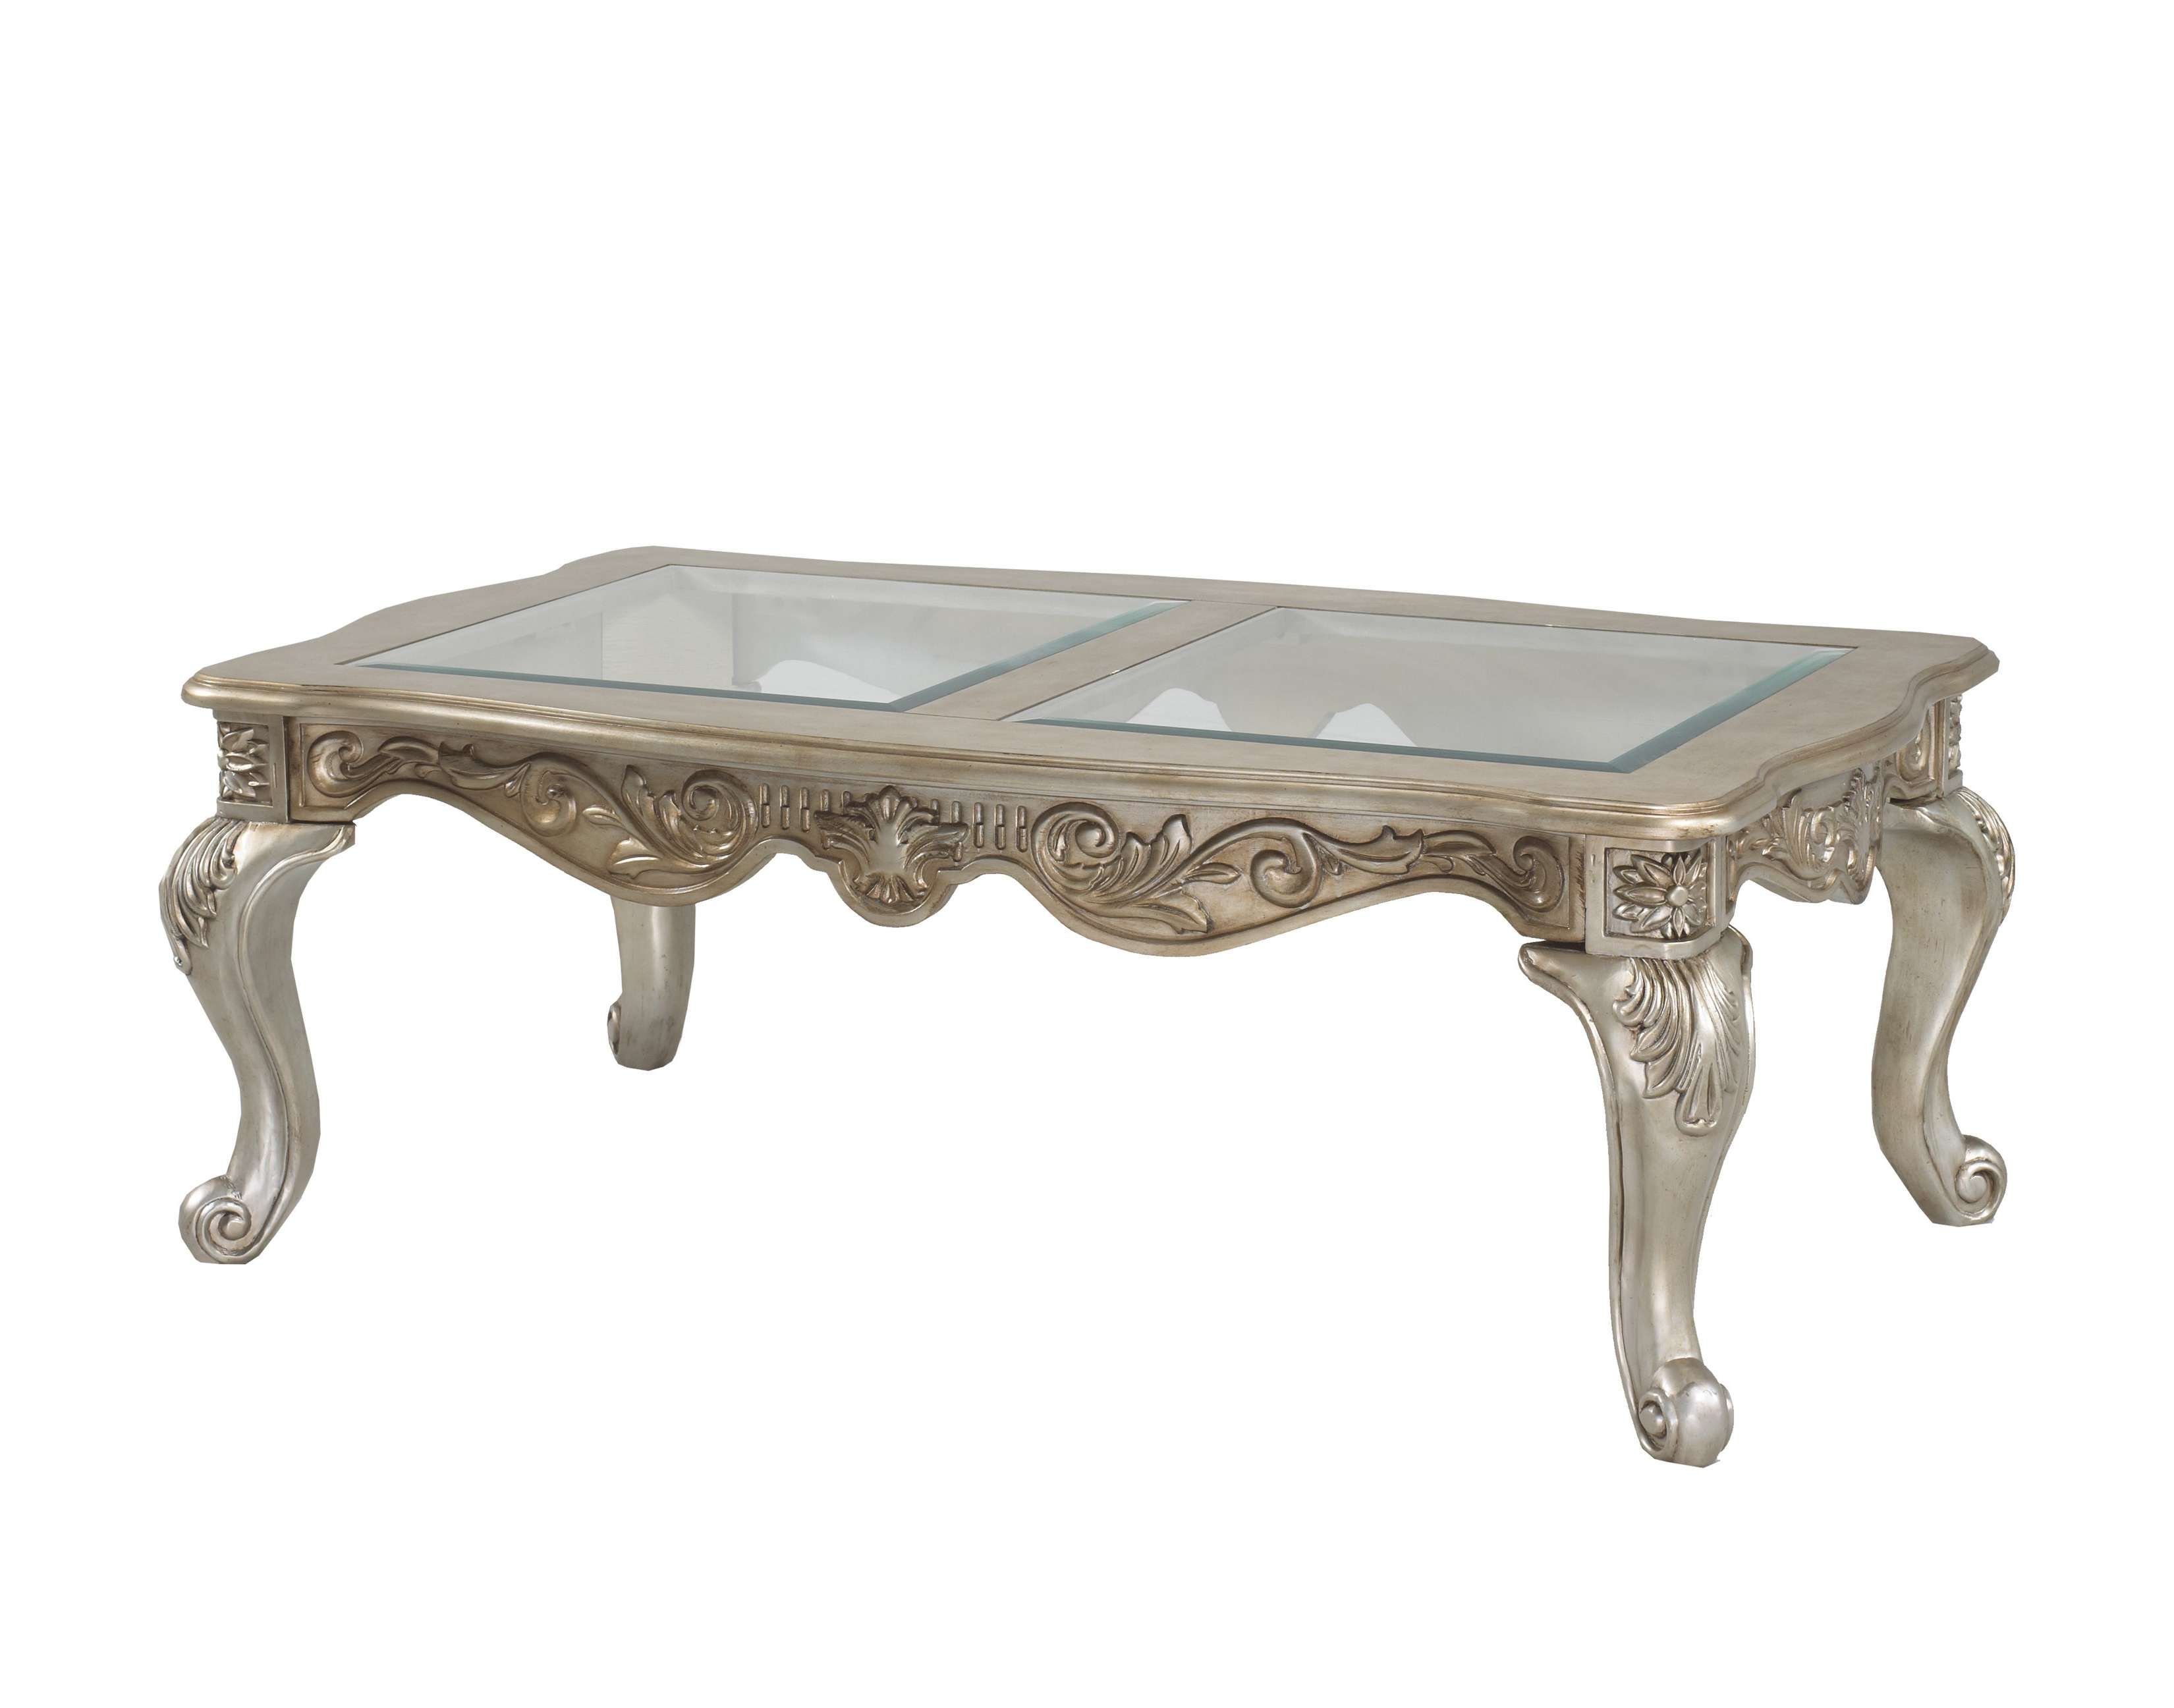 Coffee Tables : Furniture French Style Antique Metal Coffee Table Inside Trendy Vintage Glass Coffee Tables (View 2 of 20)